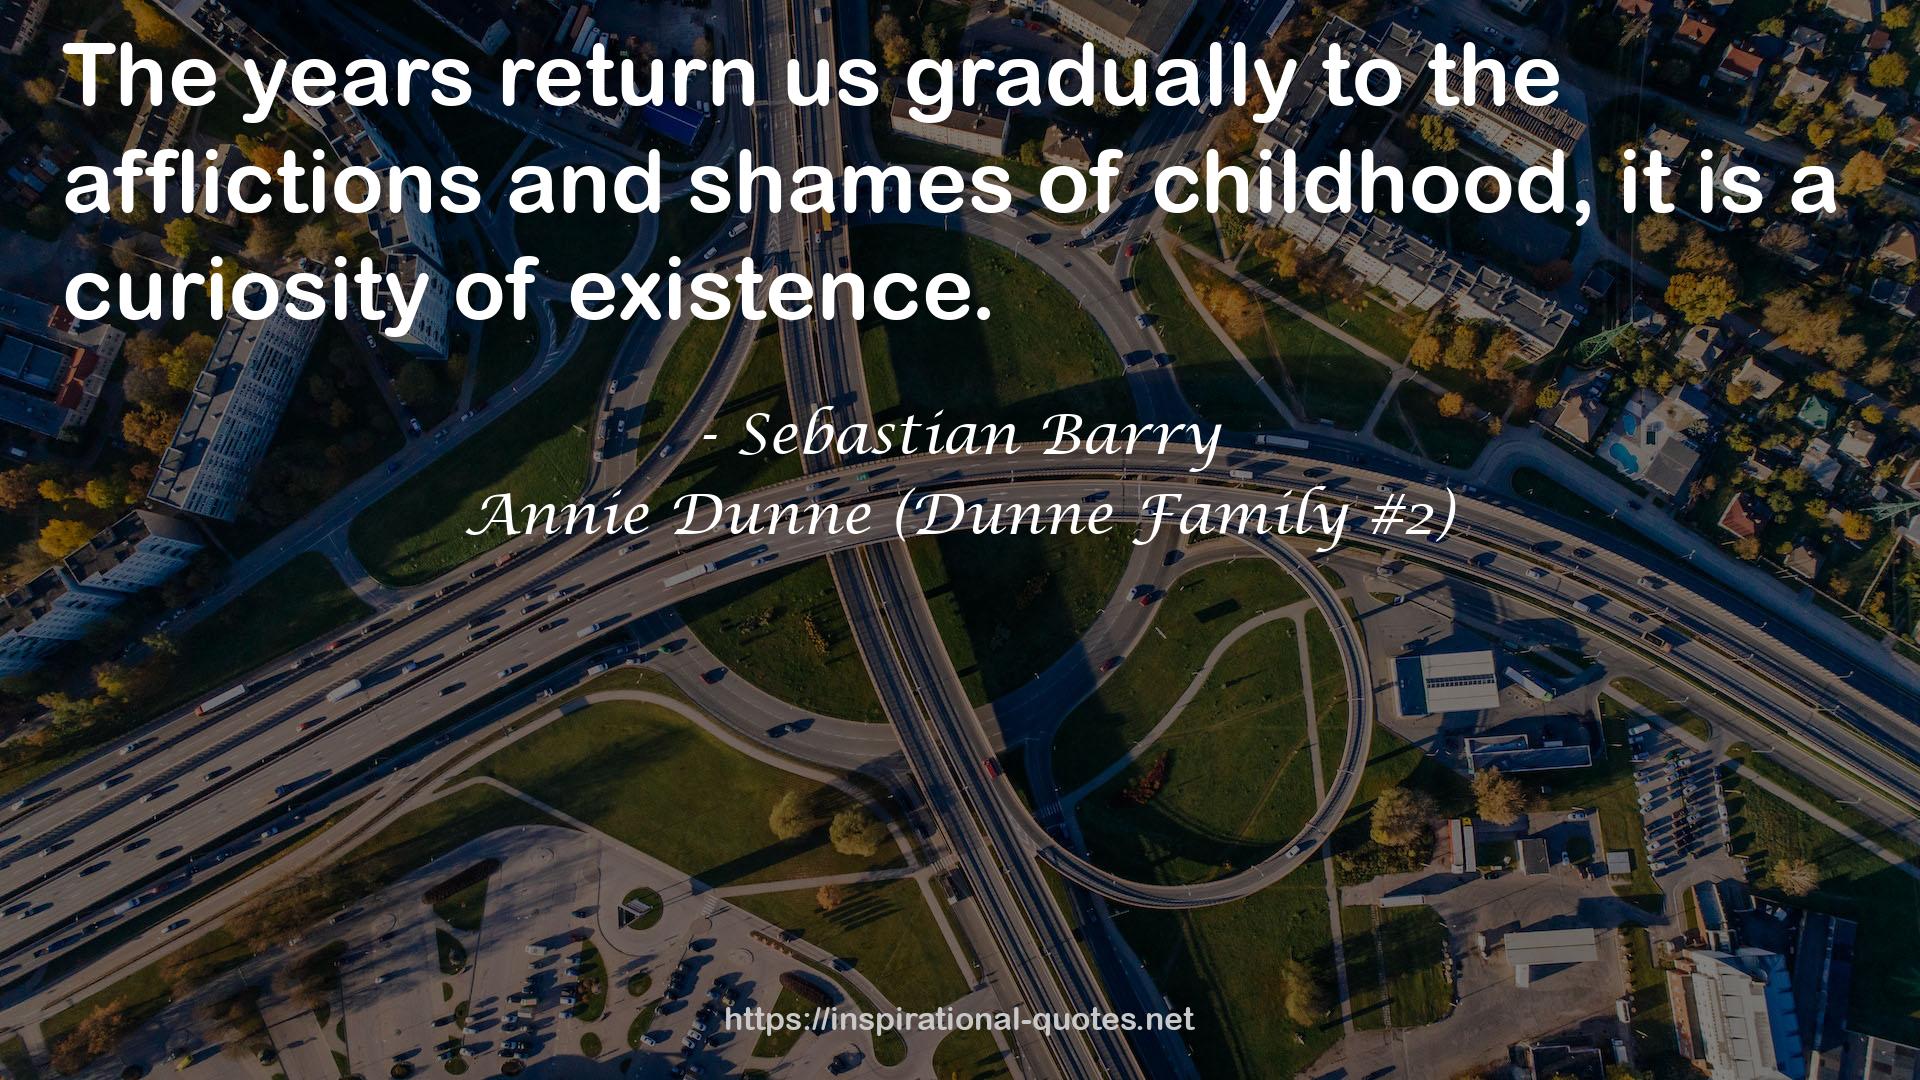 Annie Dunne (Dunne Family #2) QUOTES